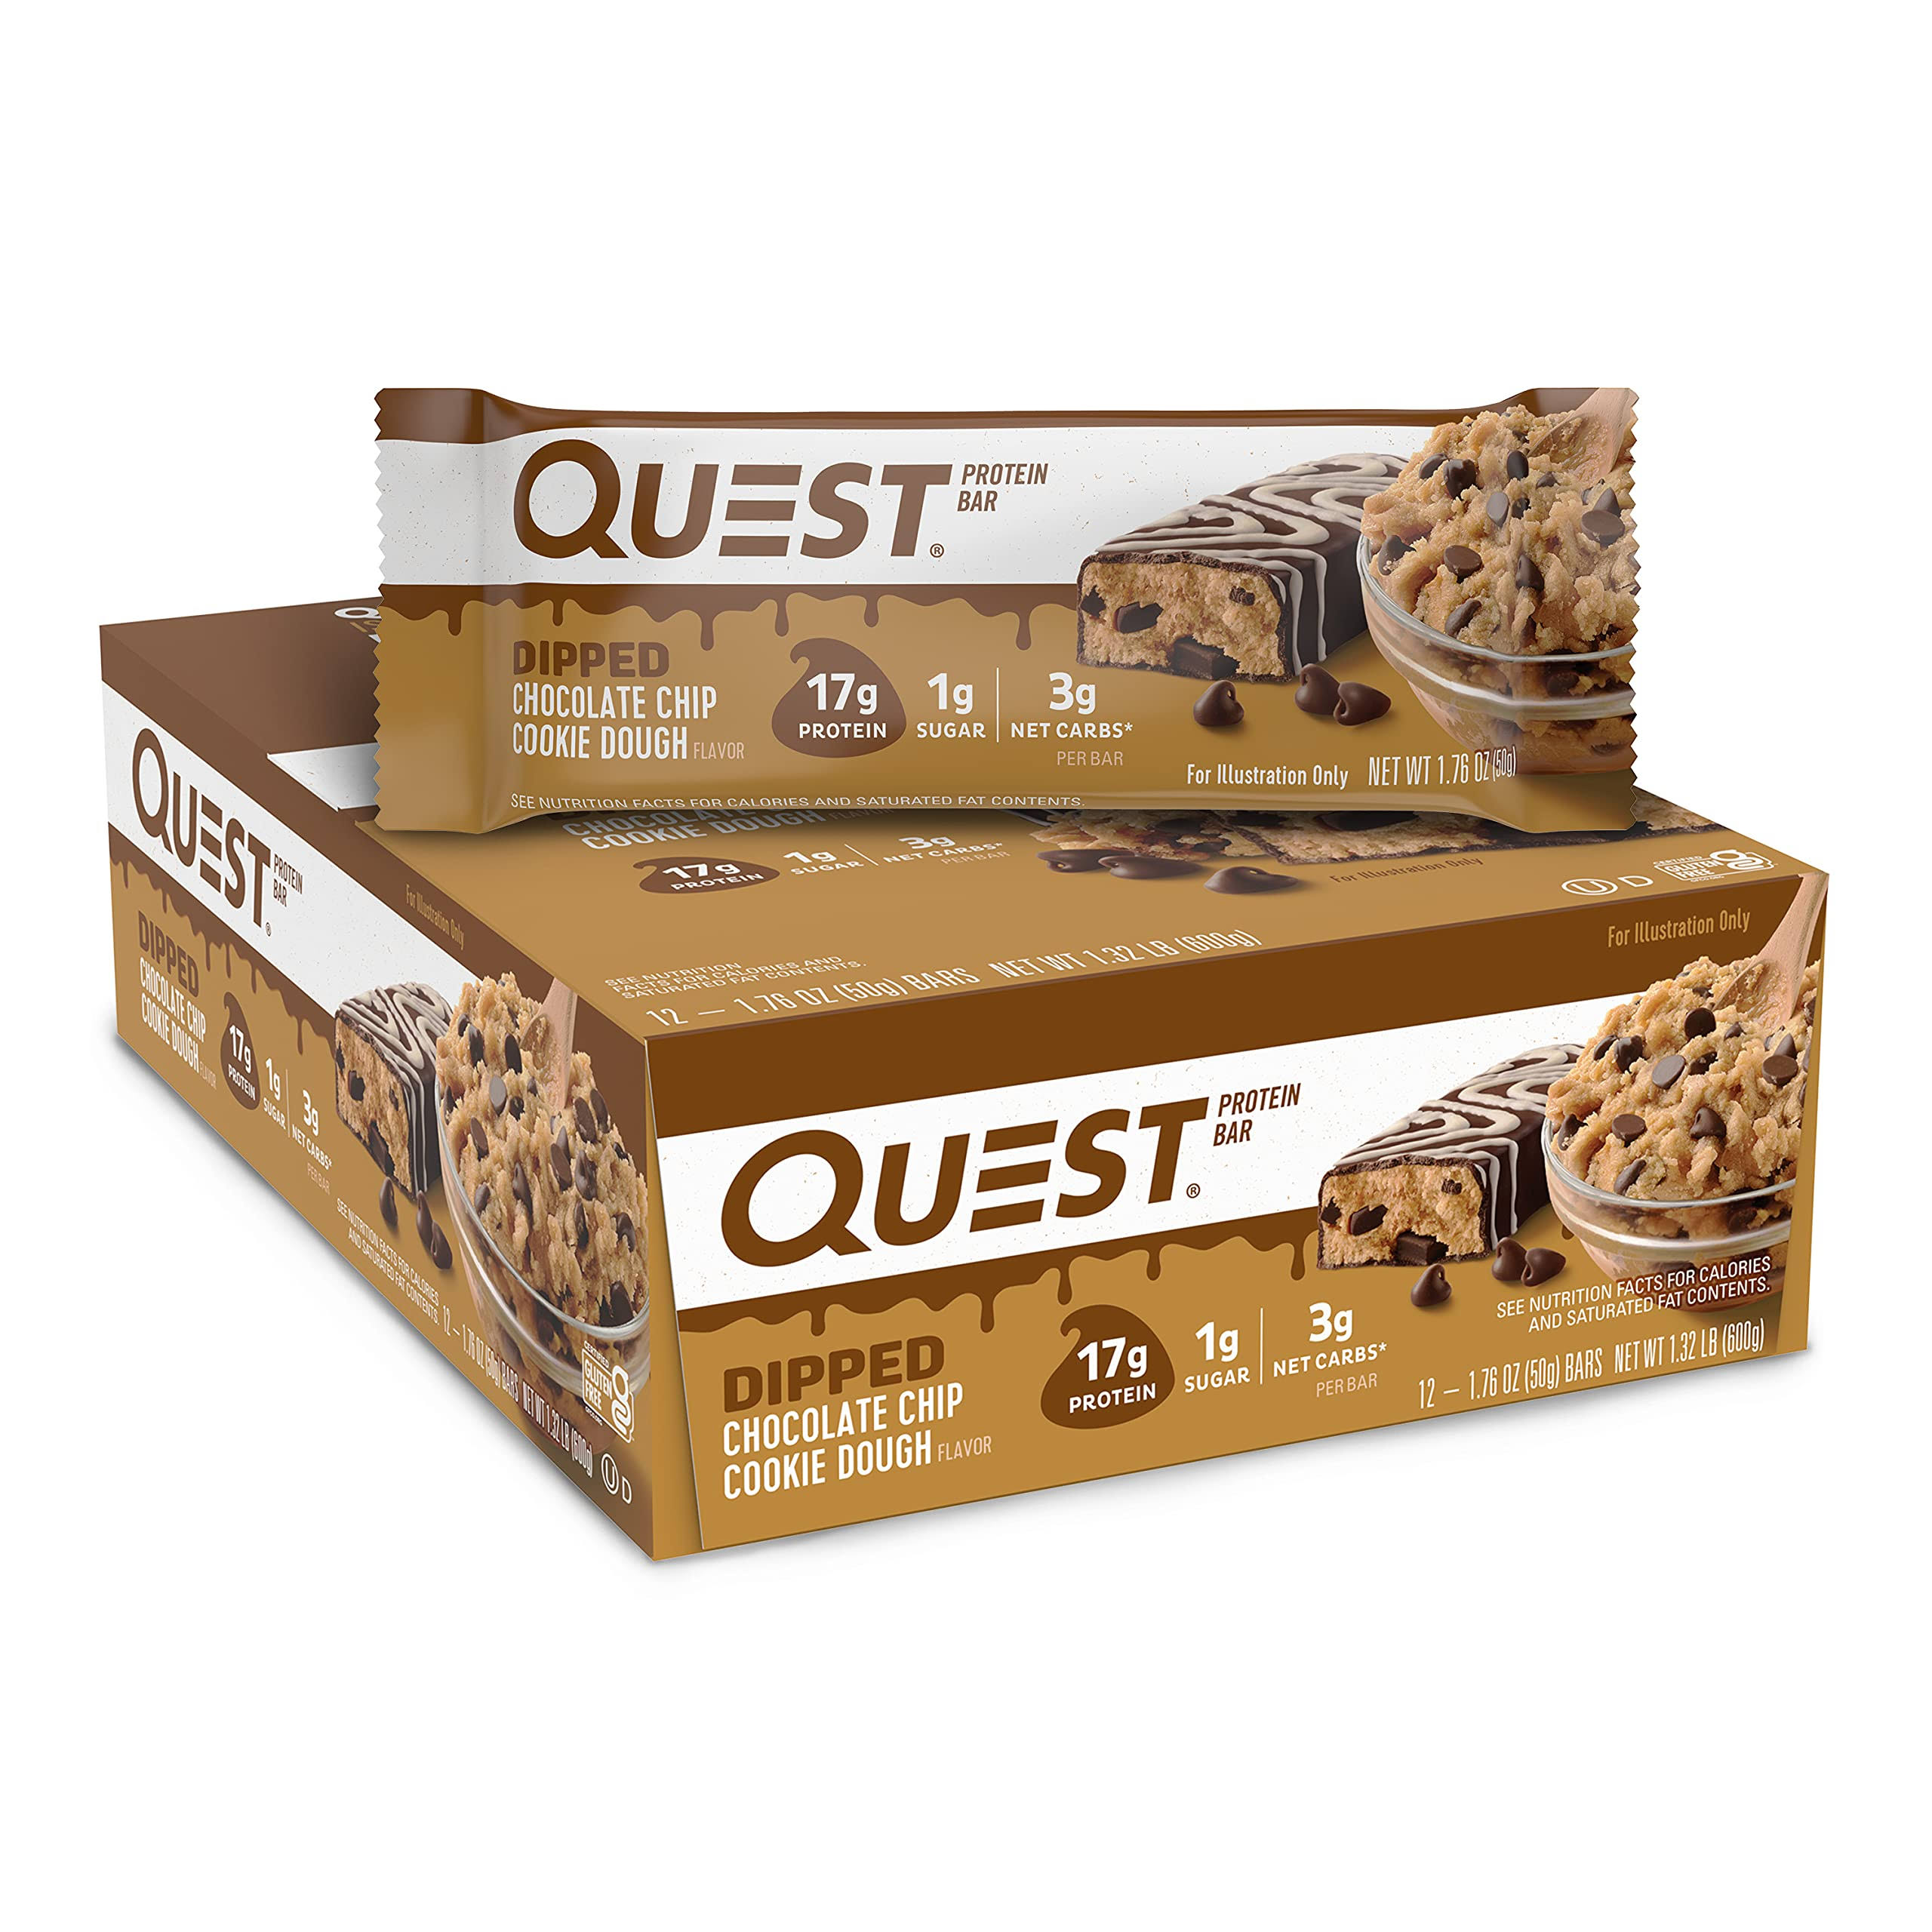 Quest Dipped Chocolate Cookie Dough Protein Bar Box